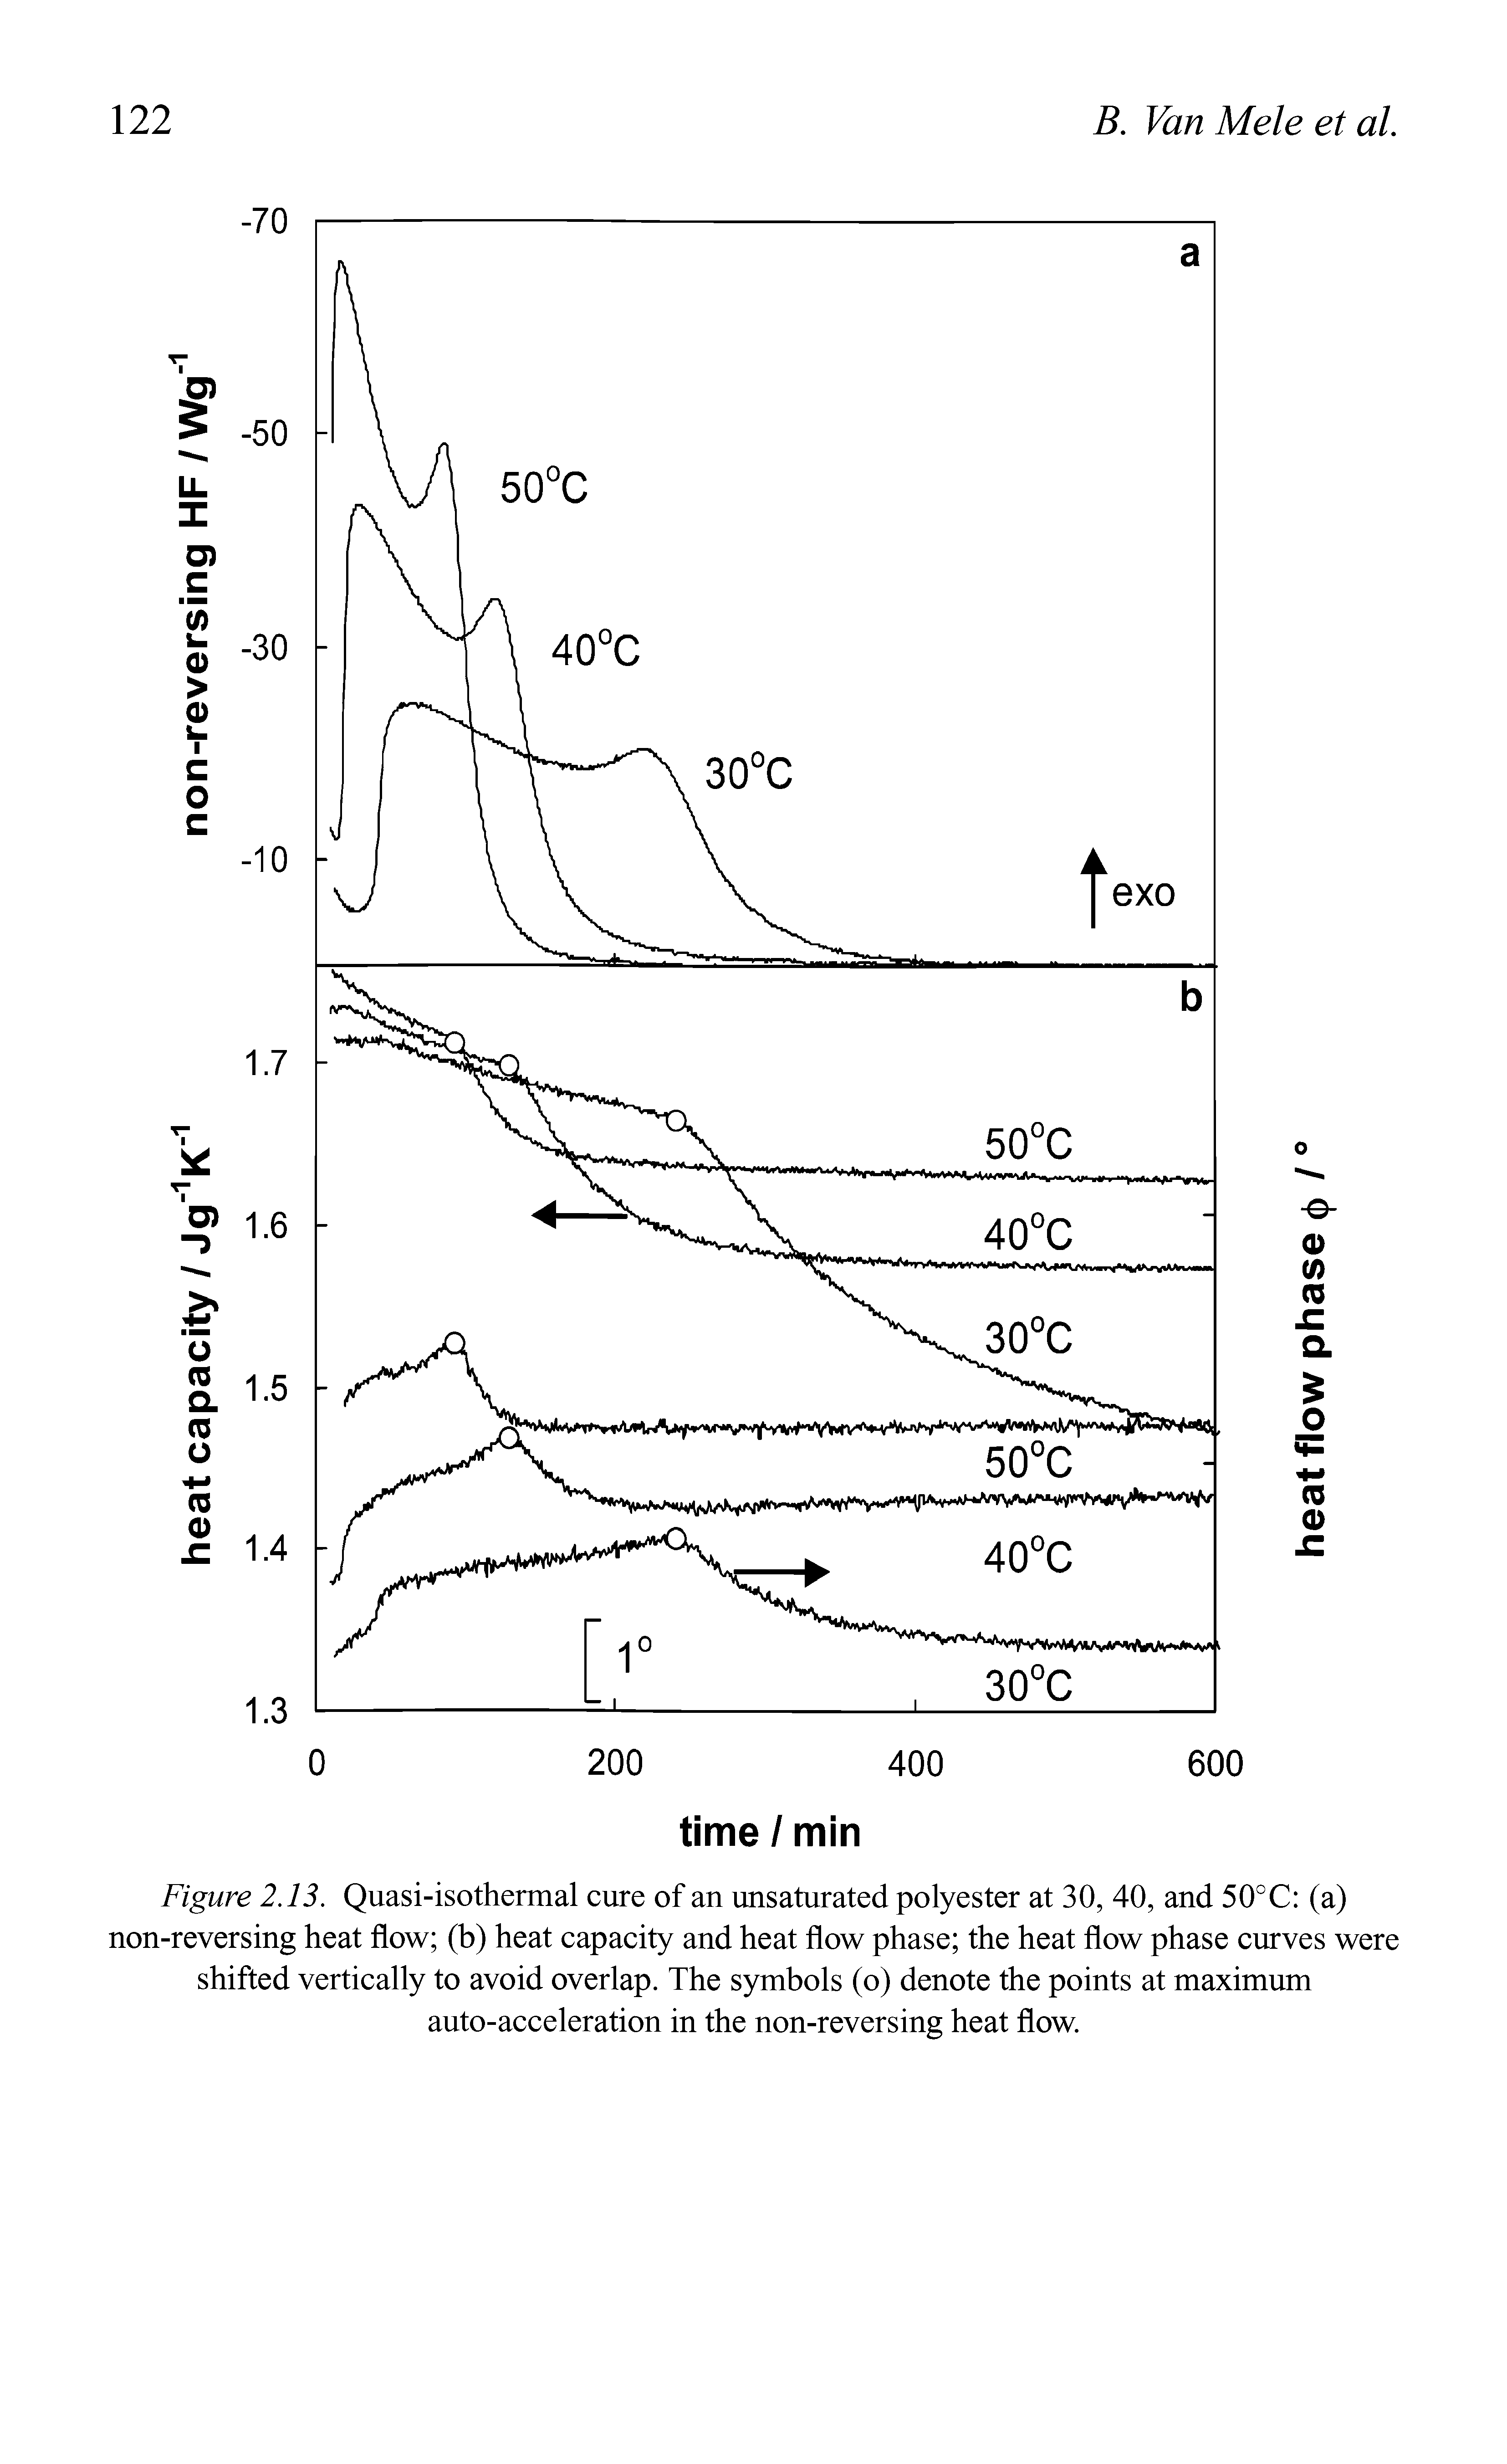 Figure 2.13. Quasi-isothermal cure of an unsaturated polyester at 30, 40, and 50°C (a) non-reversing heat flow (b) heat capacity and heat flow phase the heat flow phase curves were shifted vertically to avoid overlap. The symbols (o) denote the points at maximum auto-acceleration in the non-reversing heat flow.